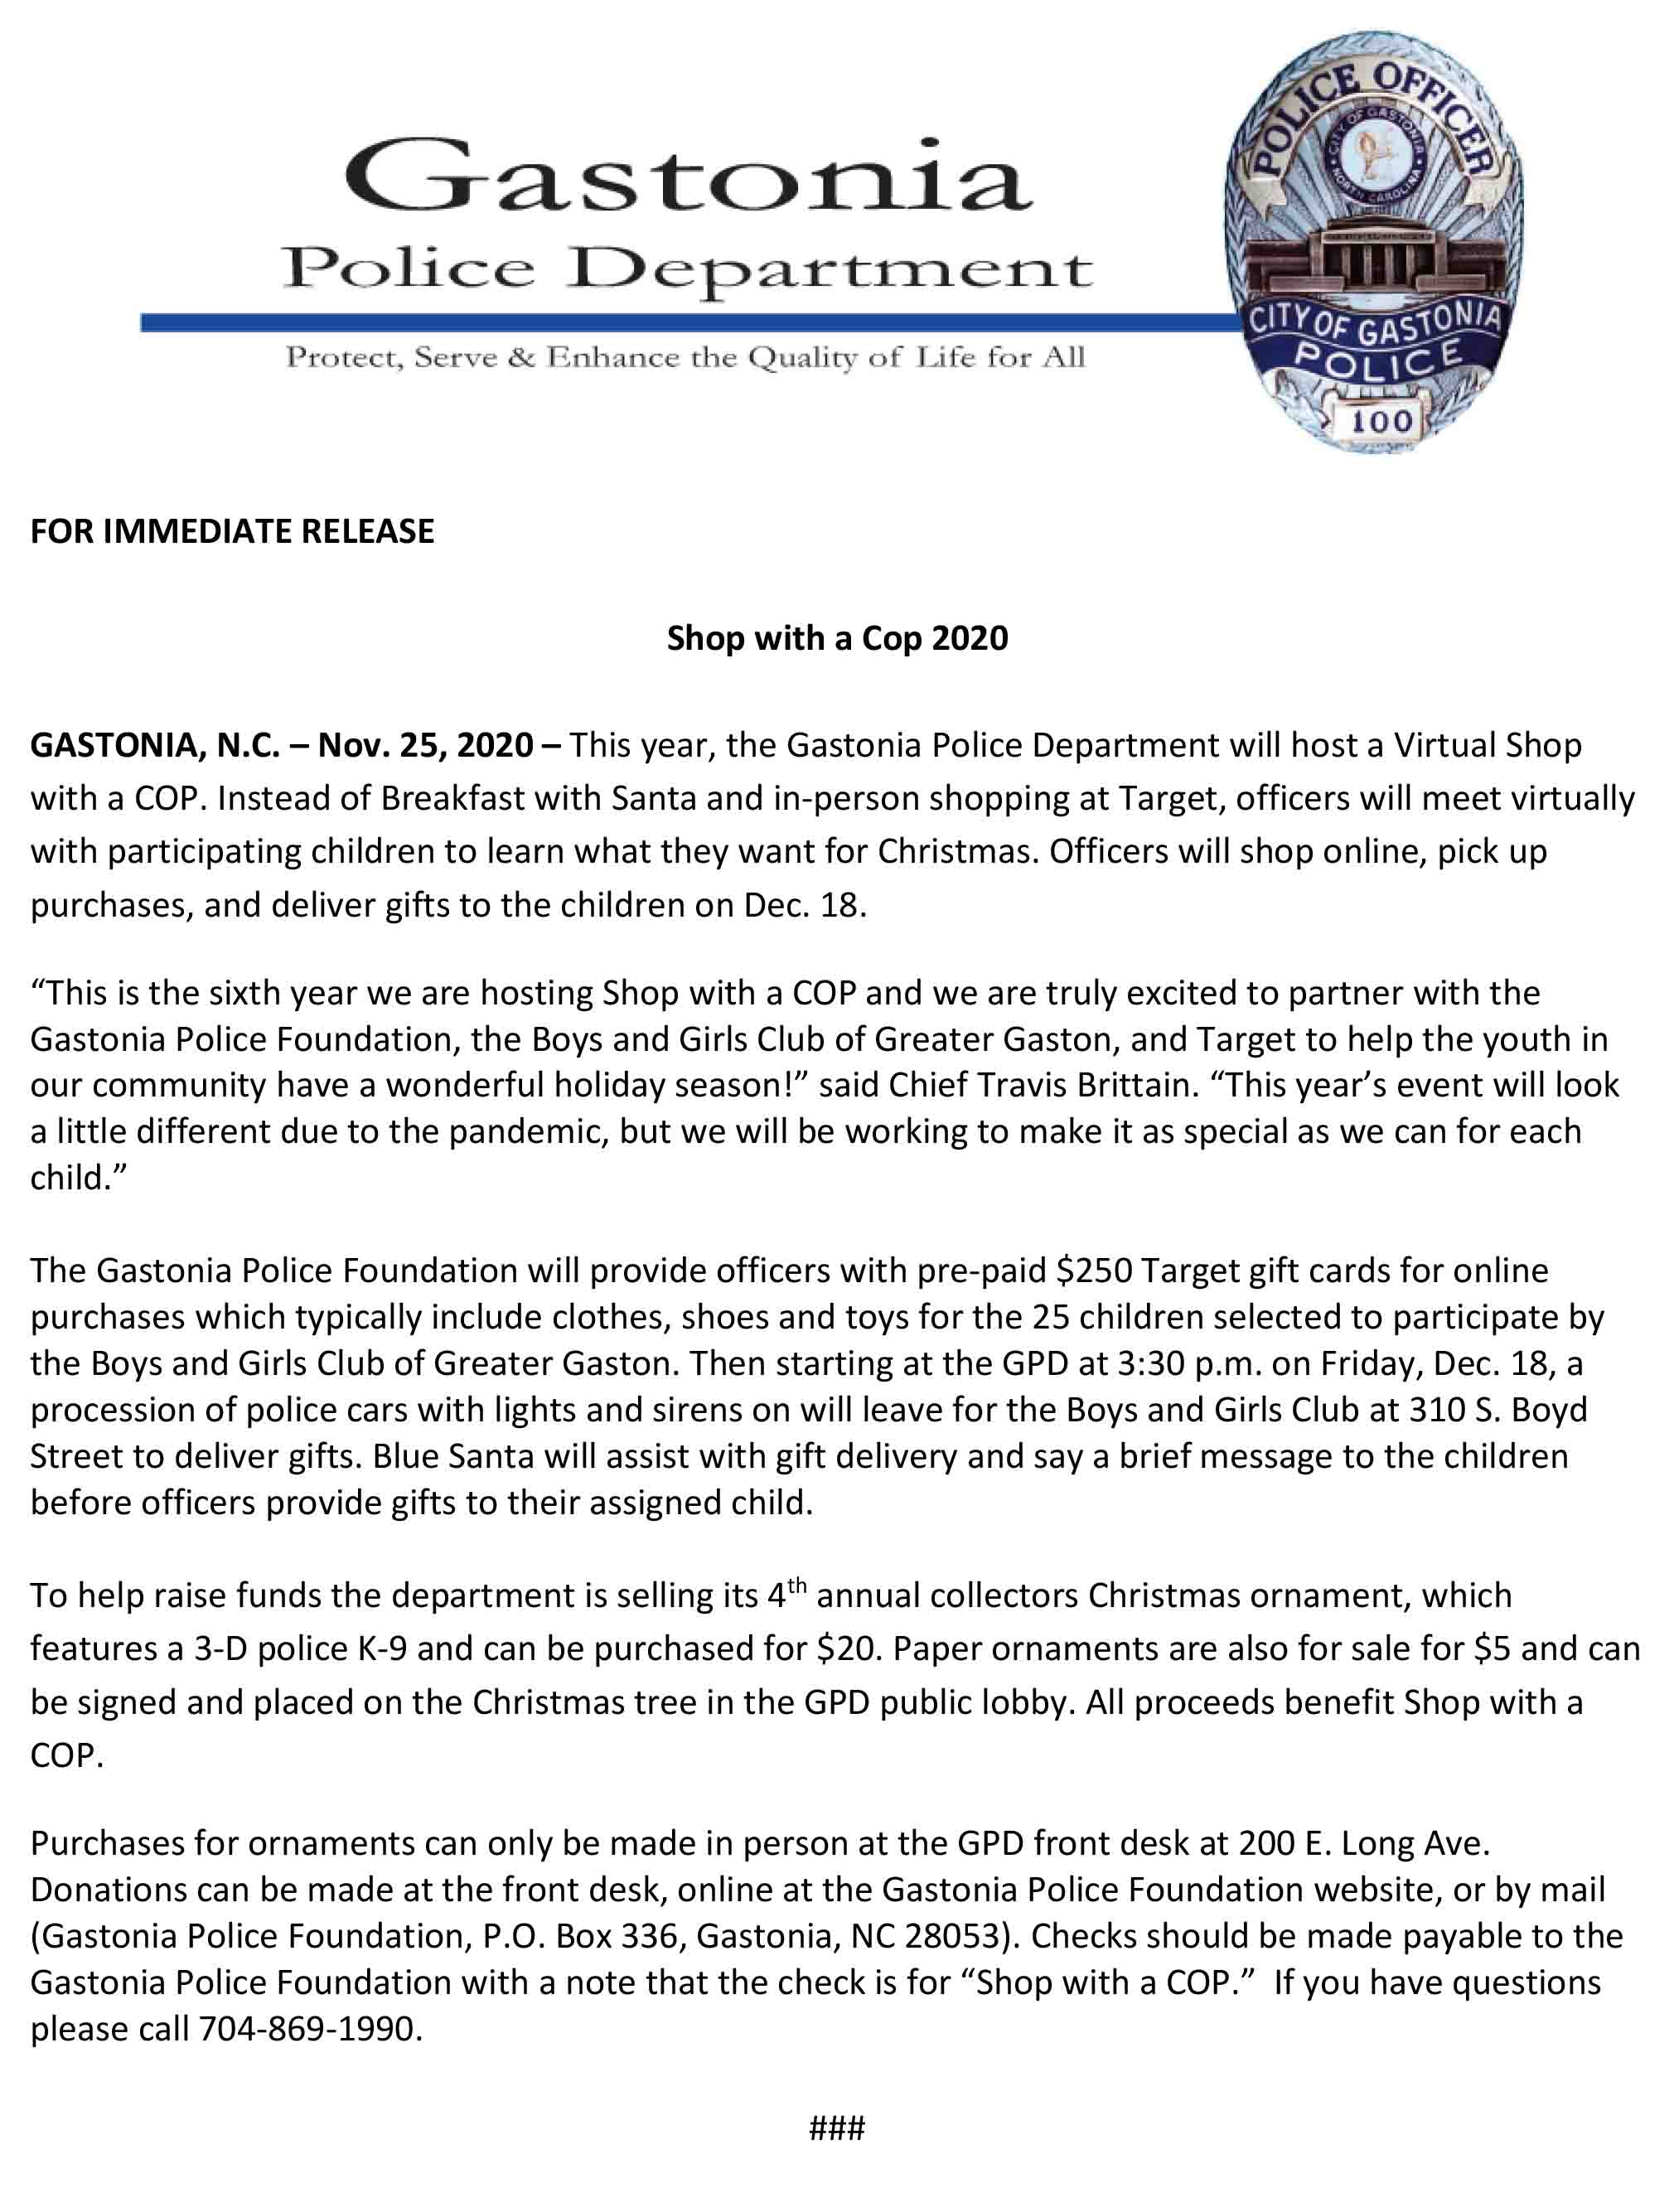 Shop with a Cop 2020 News Release